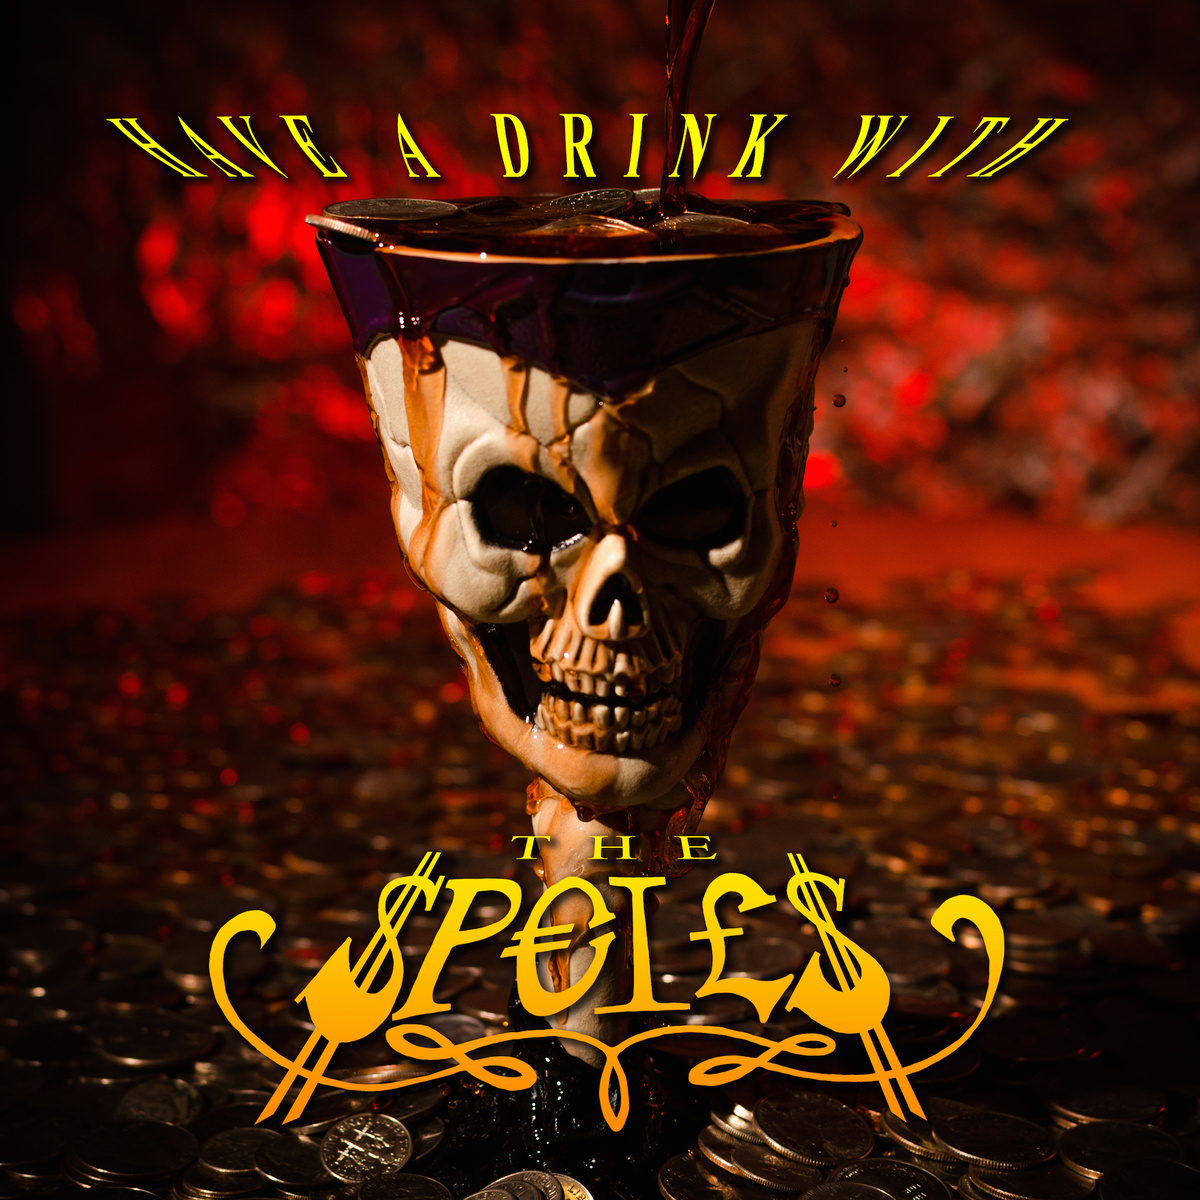 The Spoils - Have a Drink With...